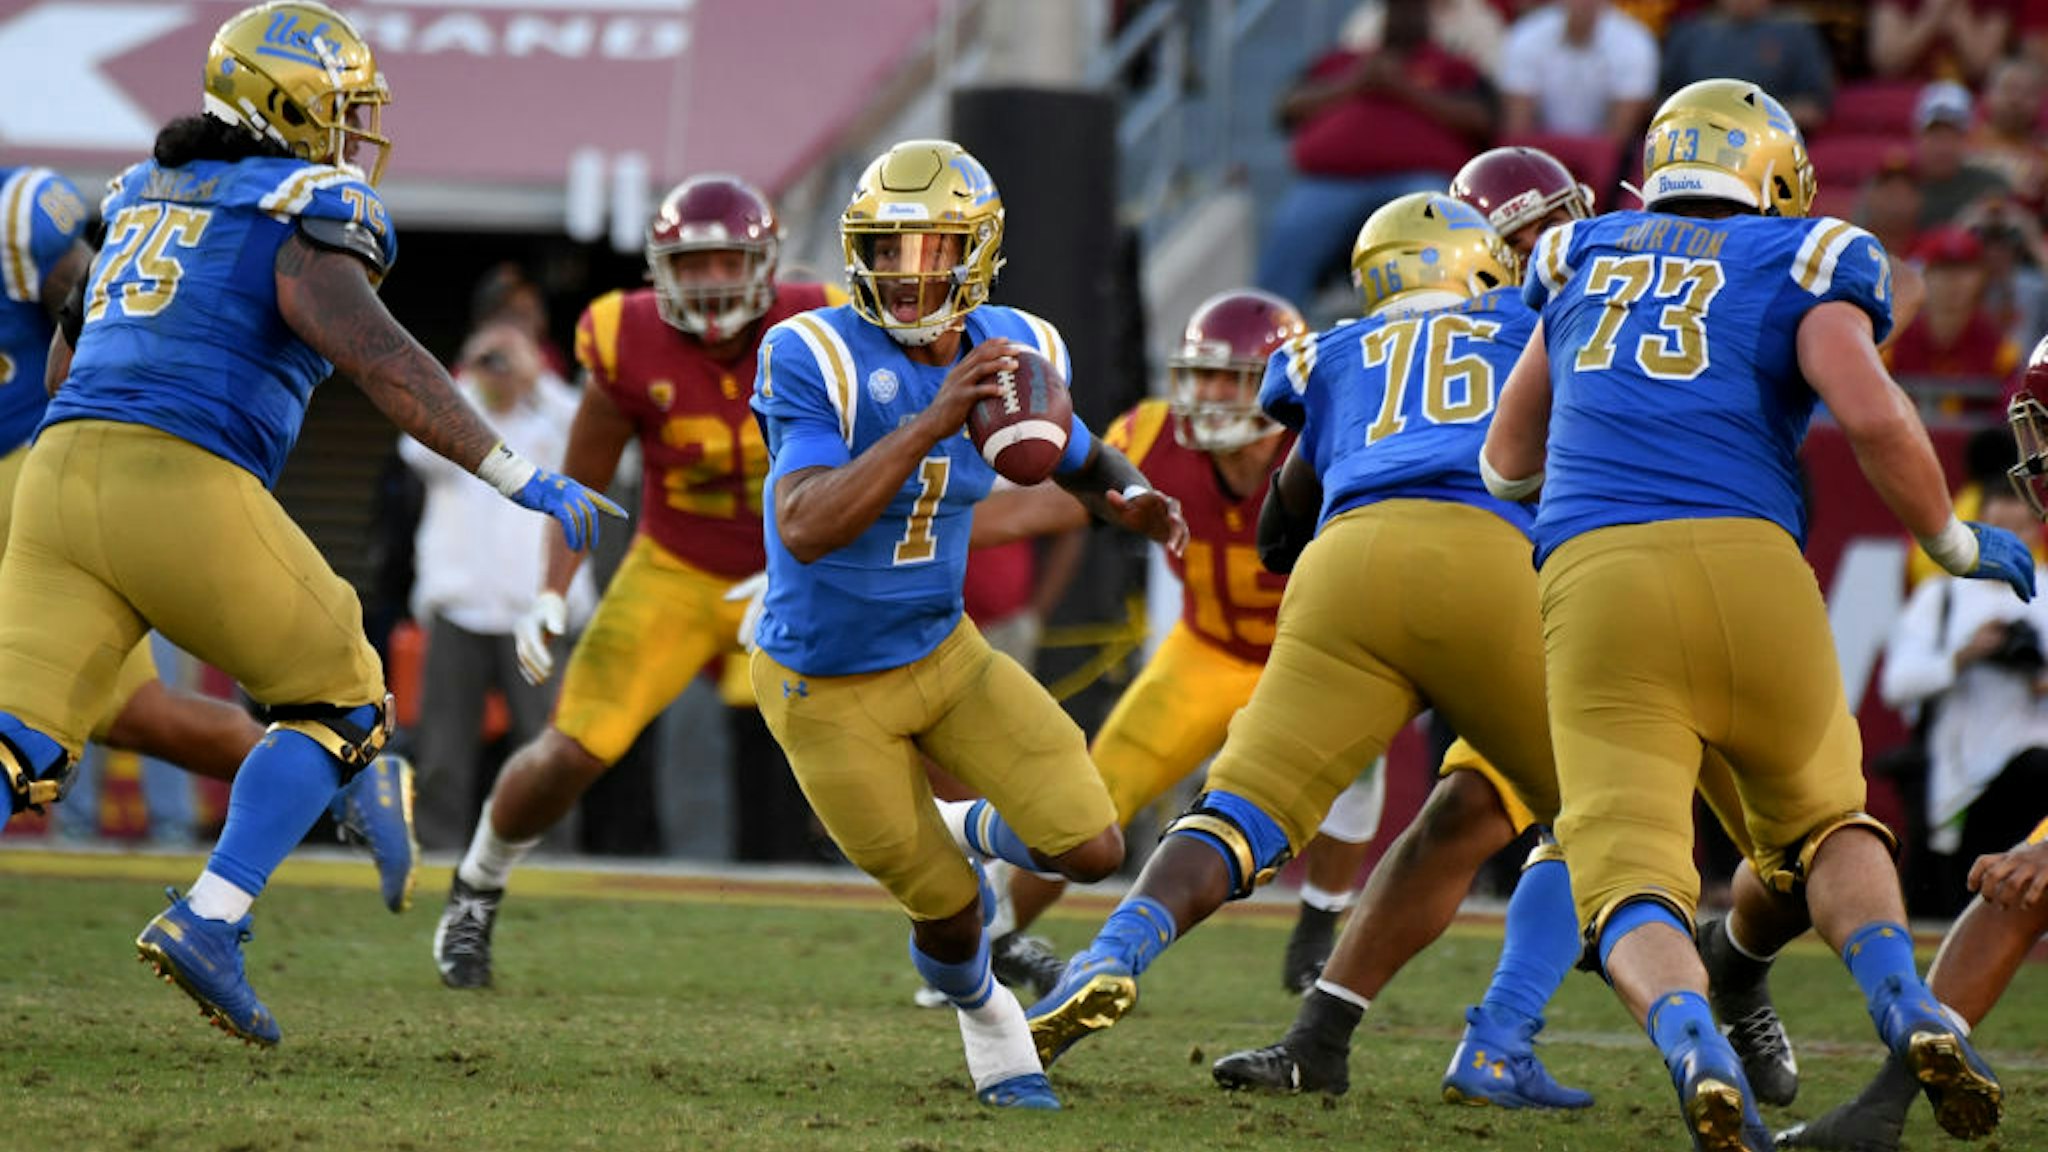 Quarterback Dorian Thompson-Robinson #1 of the UCLA Bruins prepares to pass against the USC Trojans in the second half of a NCAA football game at the Los Angeles Memorial Coliseum on Saturday, November 23, 2019 in Los Angeles, California.